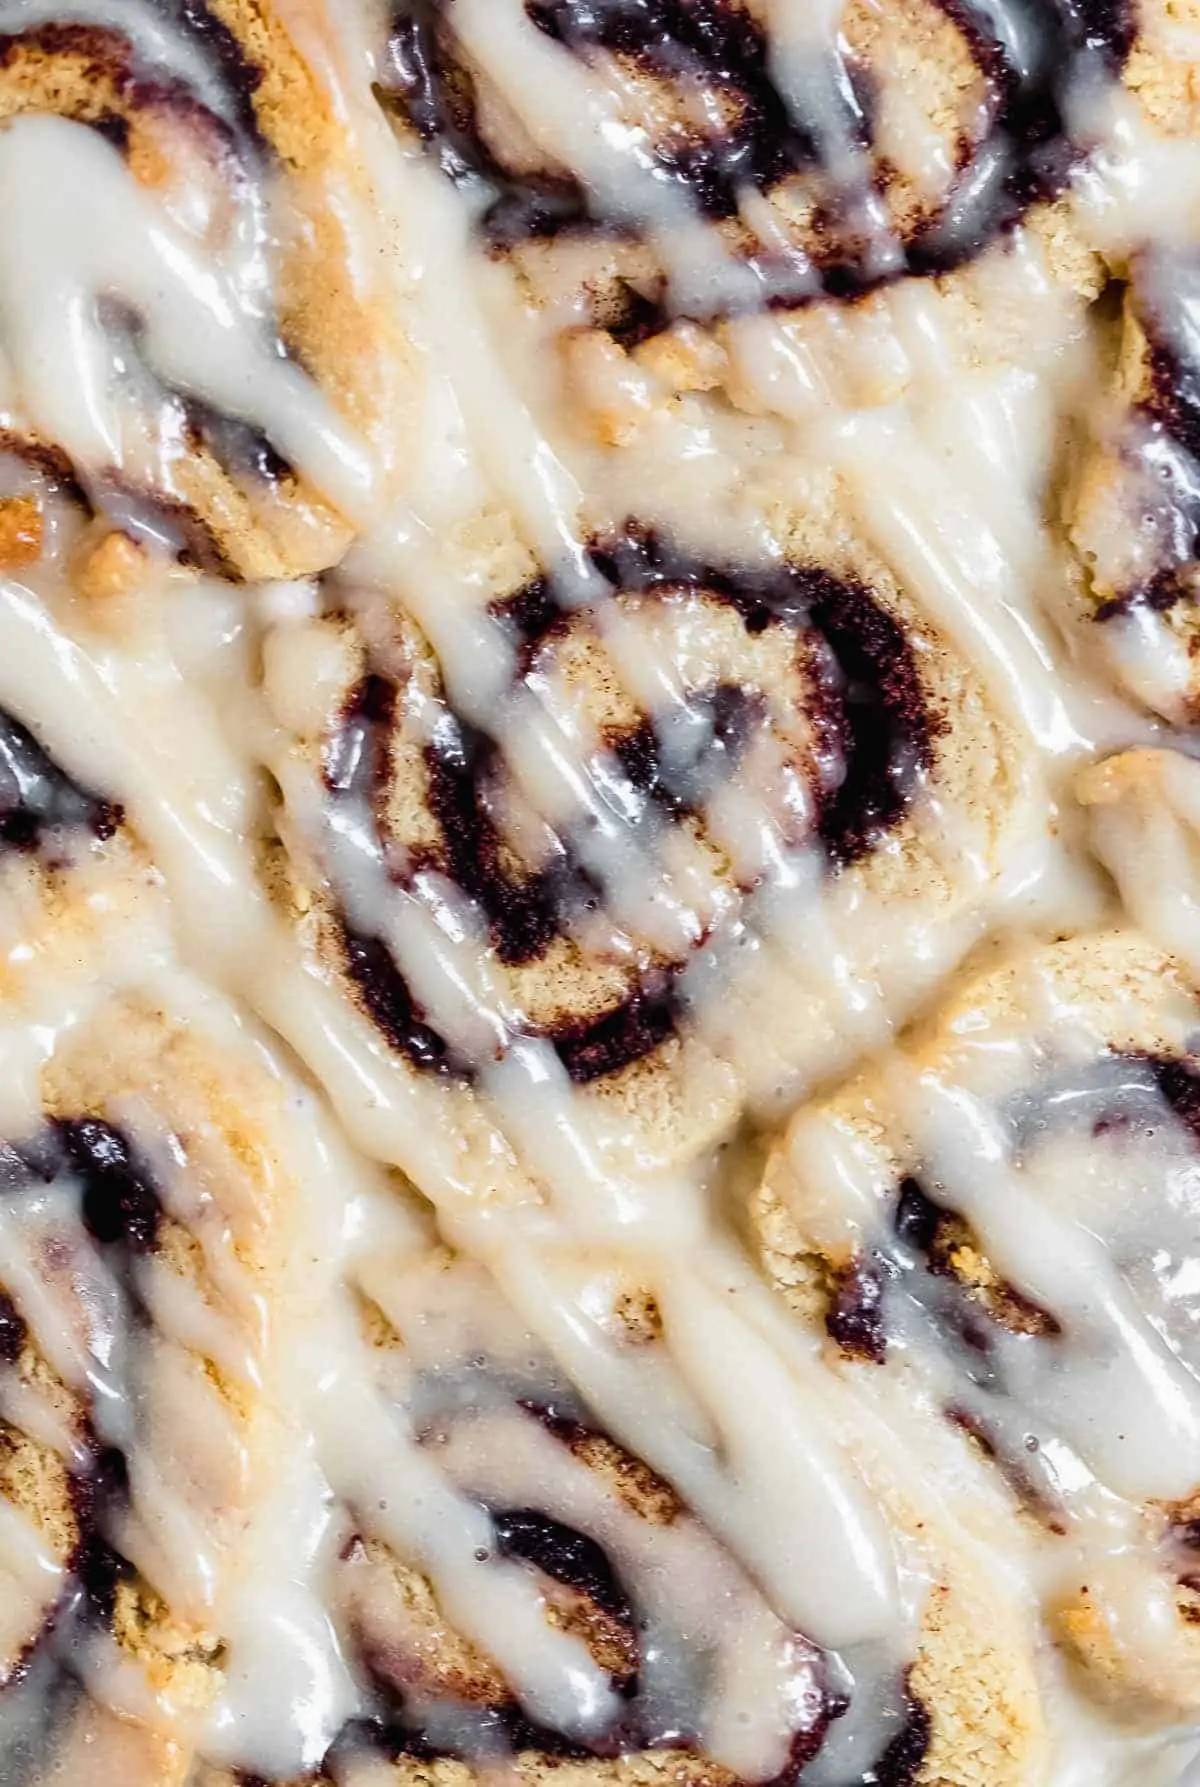 Up close image of cinnamon rolls to show gooey texture.